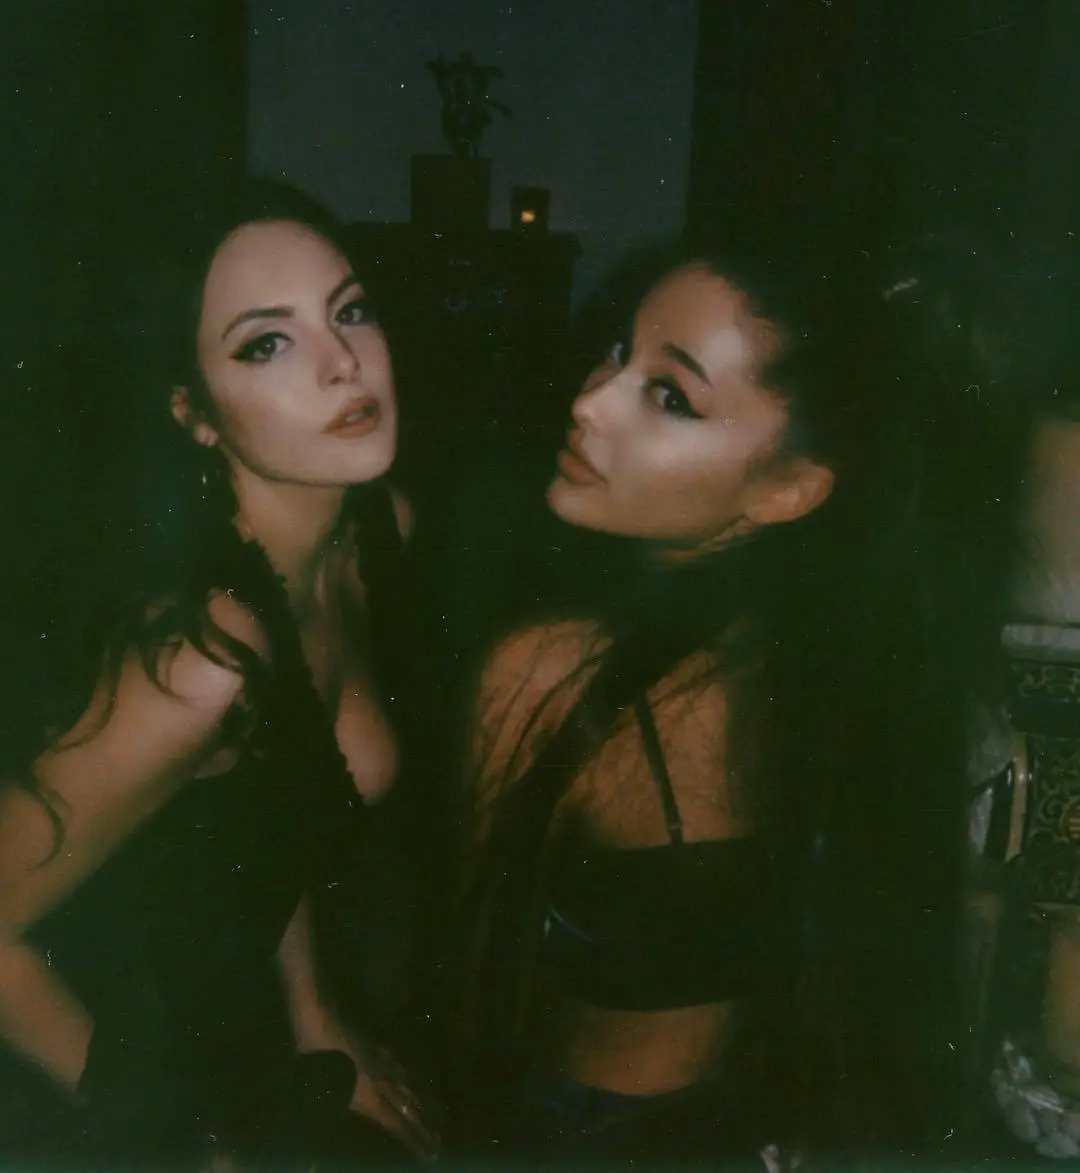 Ariana Grande Posts Loving Bday Message For 'Victorious' Co-Star